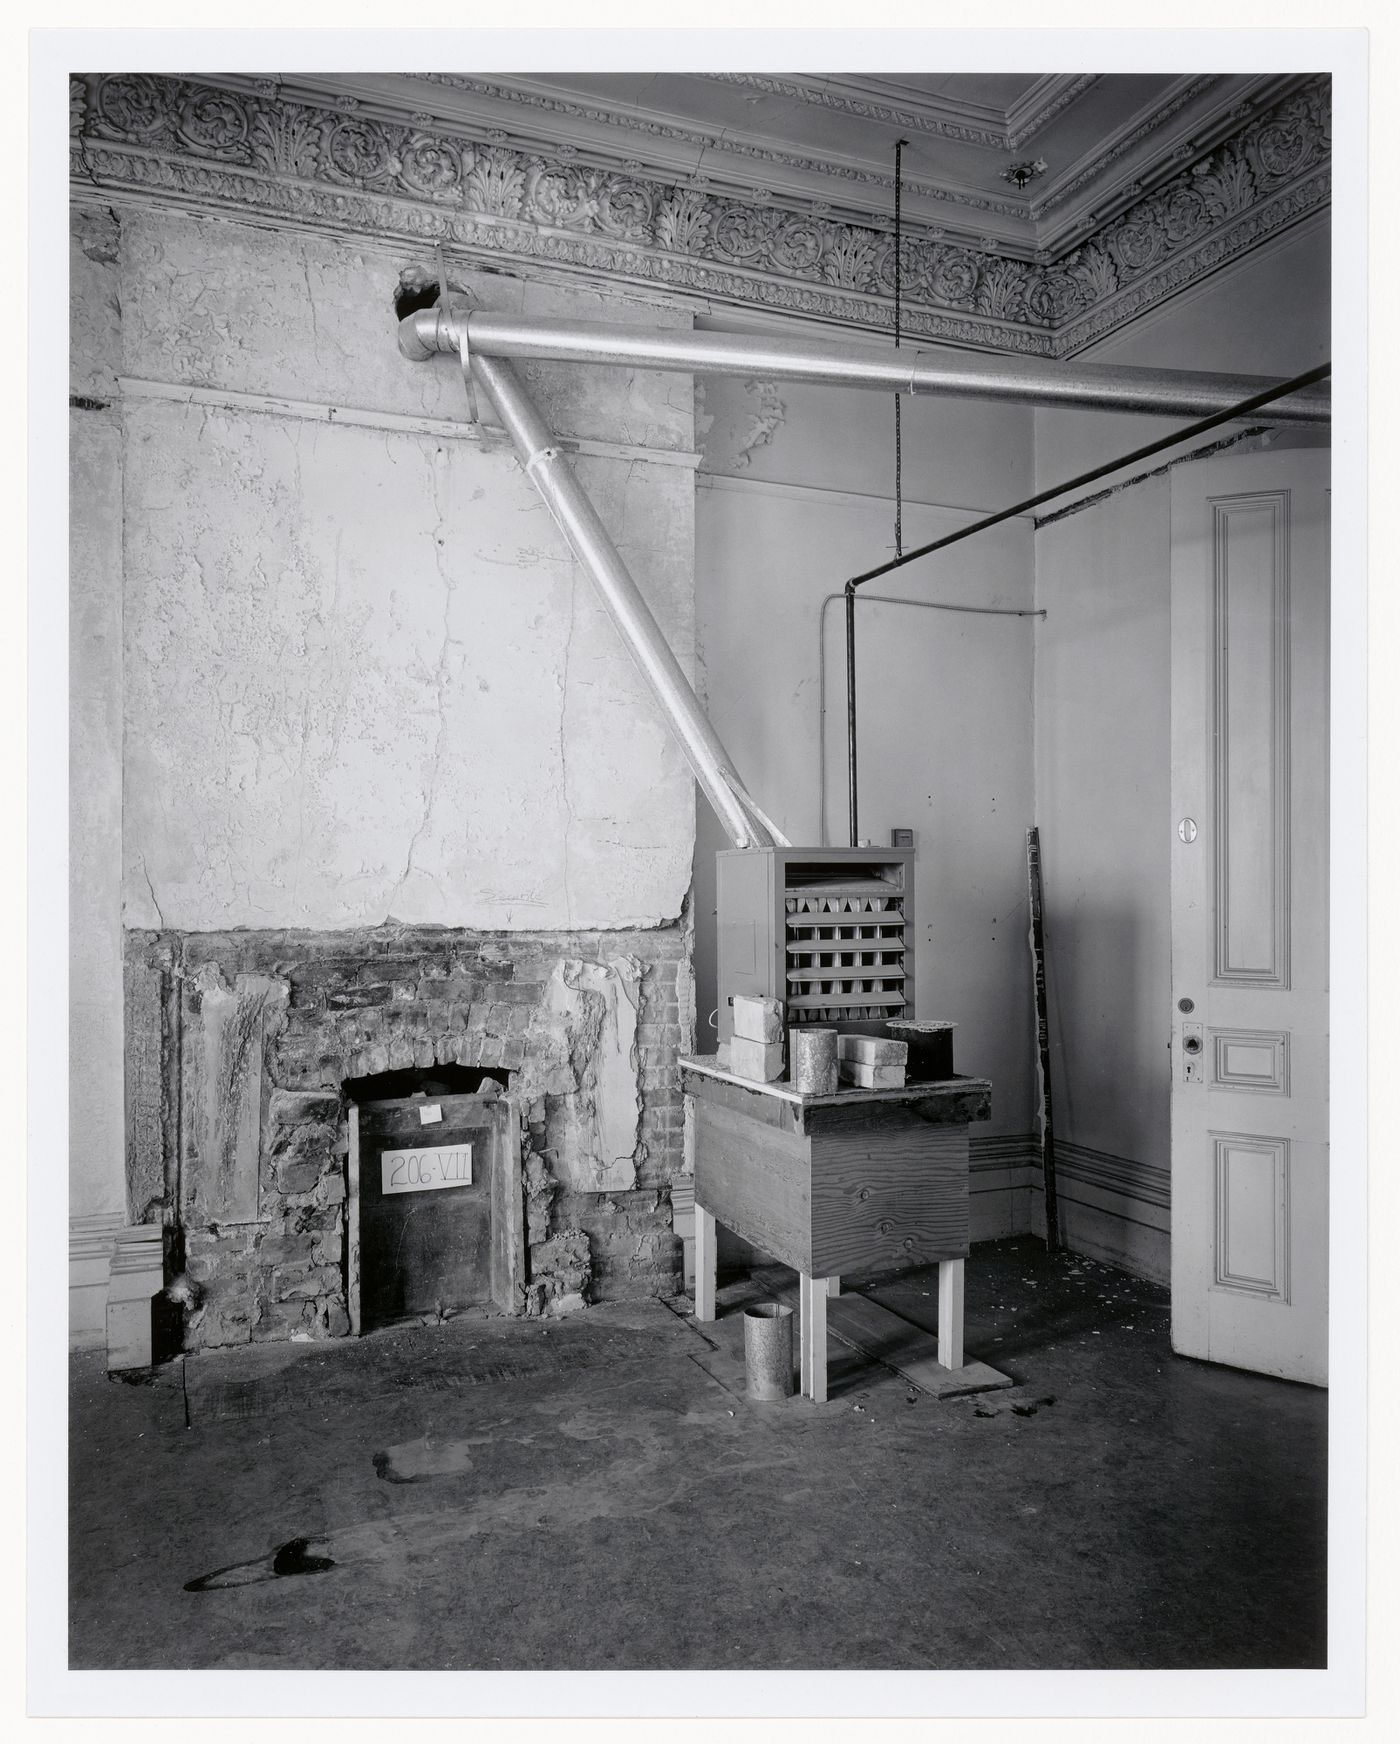 Interior view of a reception room showing a temporary furnace for construction workers and an unrestored fireplace, Shaughnessy House under renovation, Montréal, Québec